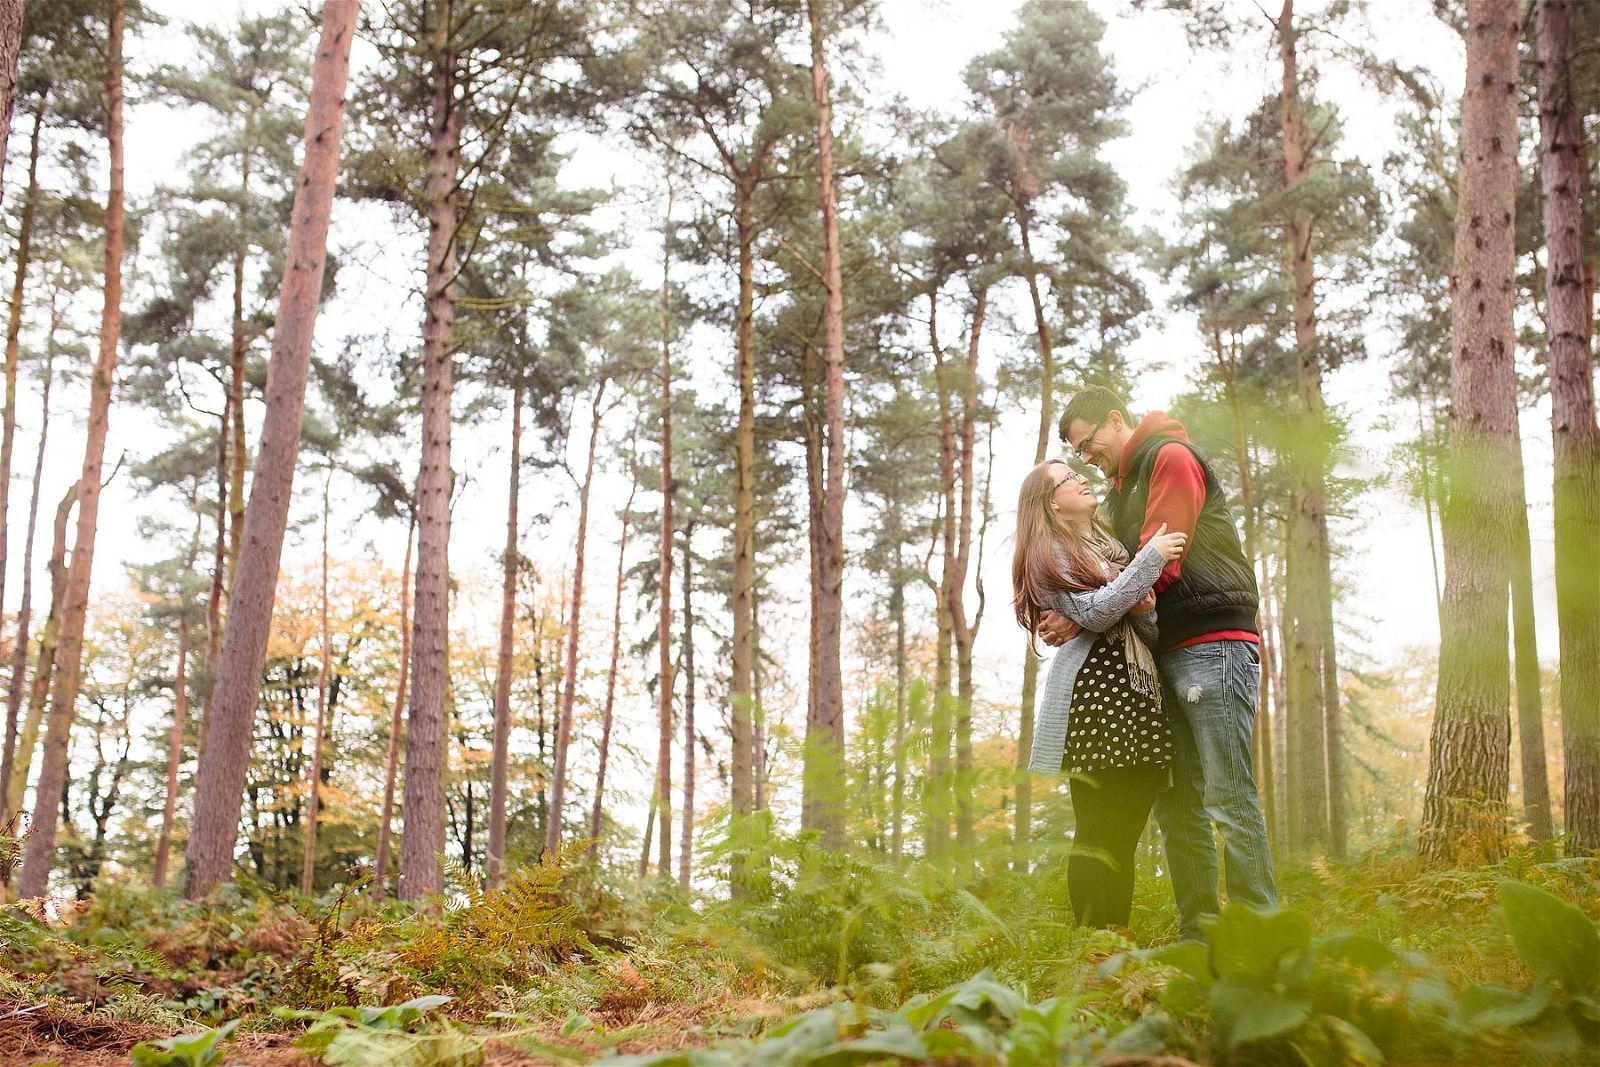 Stunning light and beautiful location proved to be the perfect setting for this couples engagement portrait session at Birches Valley in Cannock by Cannock Reportage Wedding Photographer Stuart James